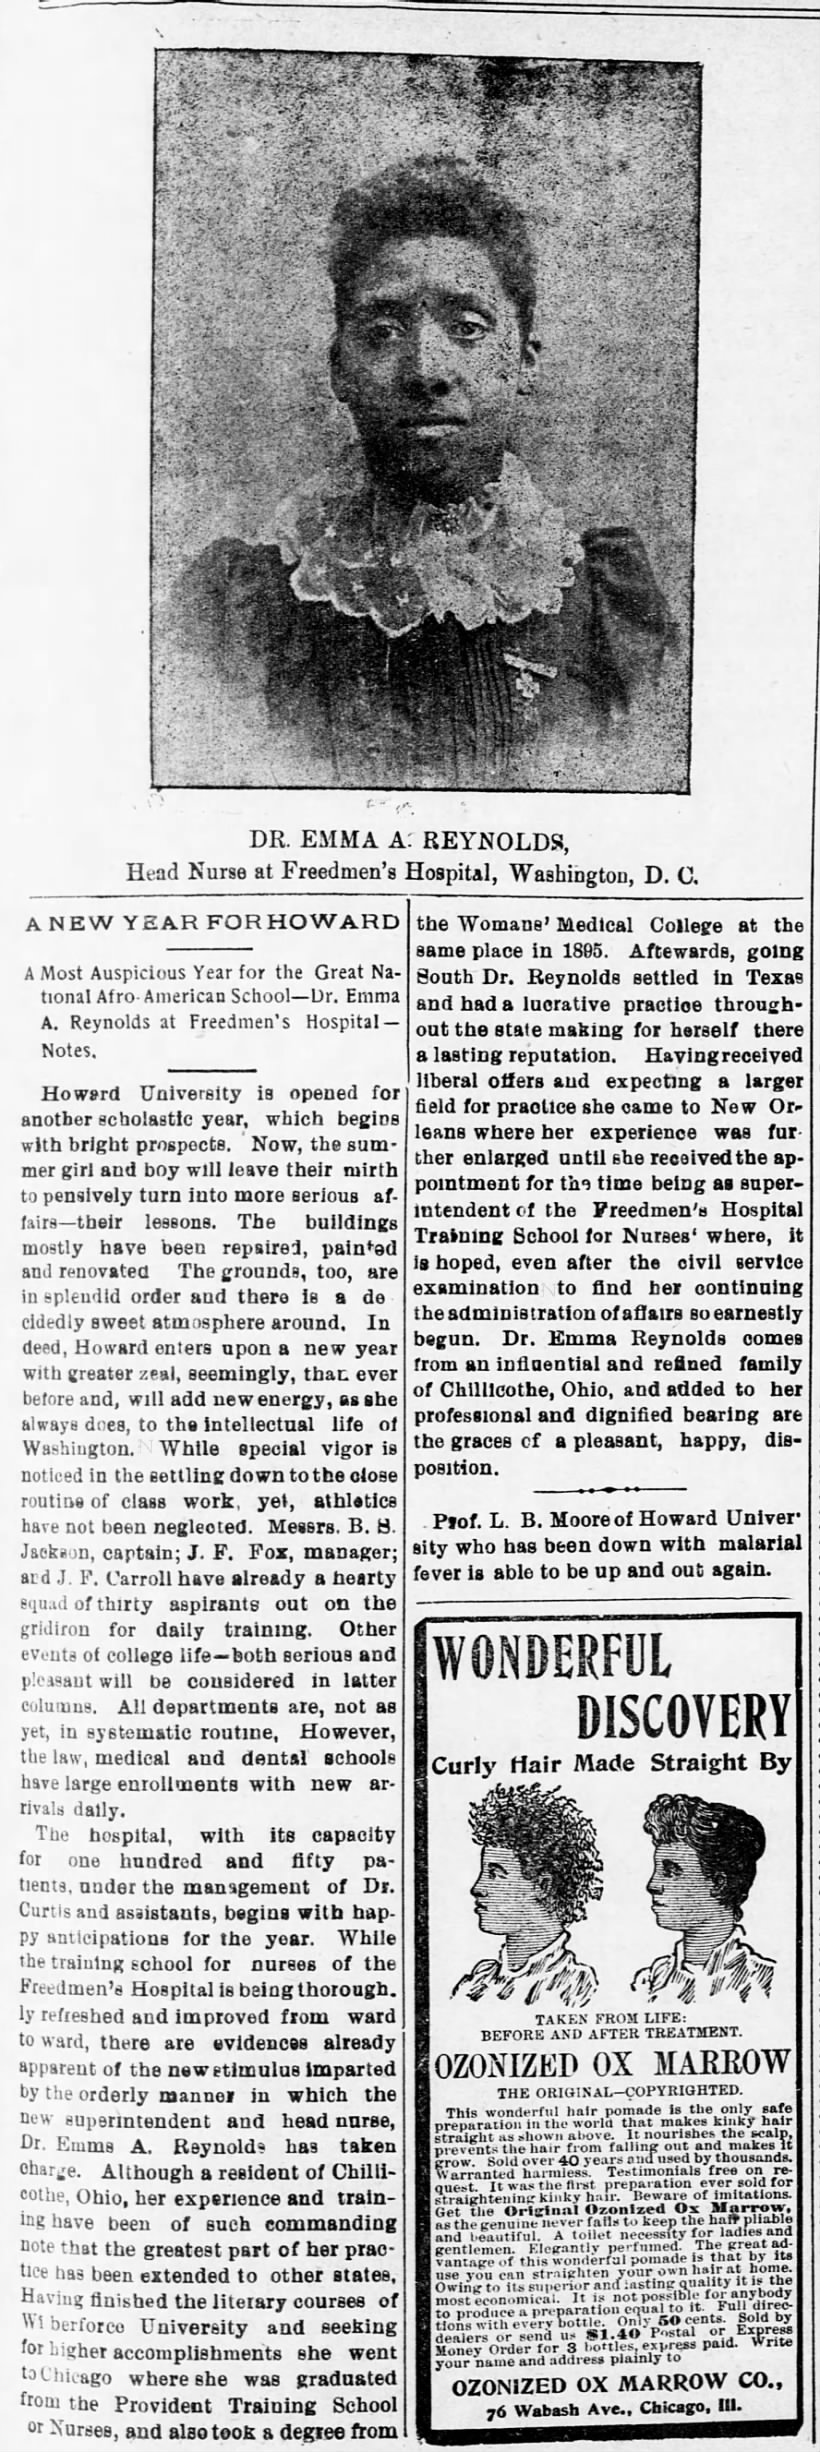 Dr. Emma A. Reynolds. The Colored American. (Washington, D. C.) October 13, 1900, p 7